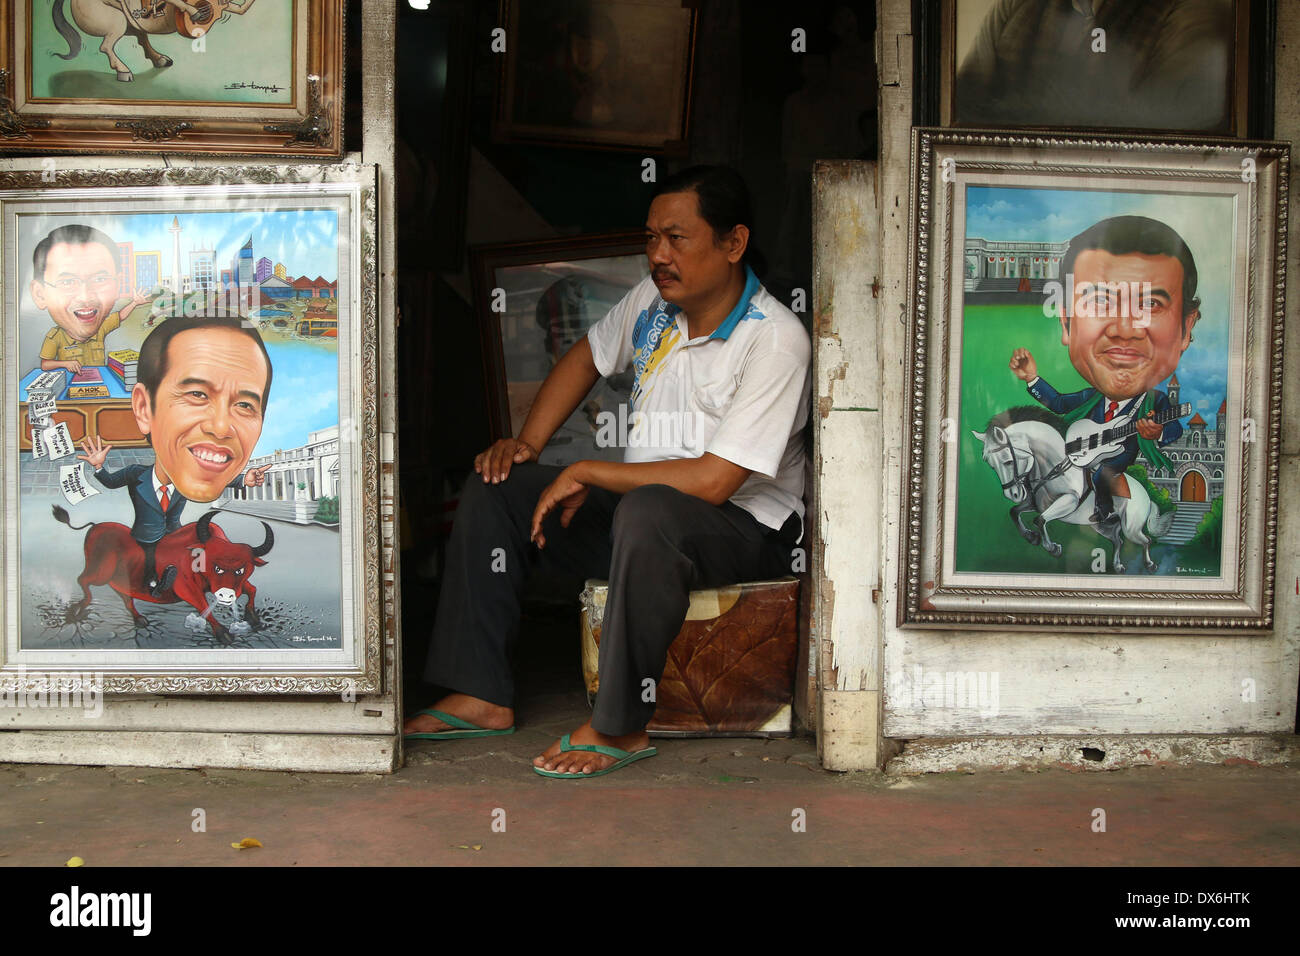 Jakarta, DKI Jakarta, Indonesia. 19th Mar, 2014. An artist painter sits near display of a painting of Jakarta Governor Joko Widodo( Left Below) and A Dangdut Musician, Rhoma Irama (Right Below) at Street Painting Shop Vendor in Jakarta. March 19, 2014 . Joko Widodo who is running for president for the Indonesian Democratic Party of Struggle (PDI-P) and Rhoma Irama a president candidate for the National Awakening Party (PKB). Credit:  Jeff Aries/ZUMAPRESS.com/Alamy Live News Stock Photo